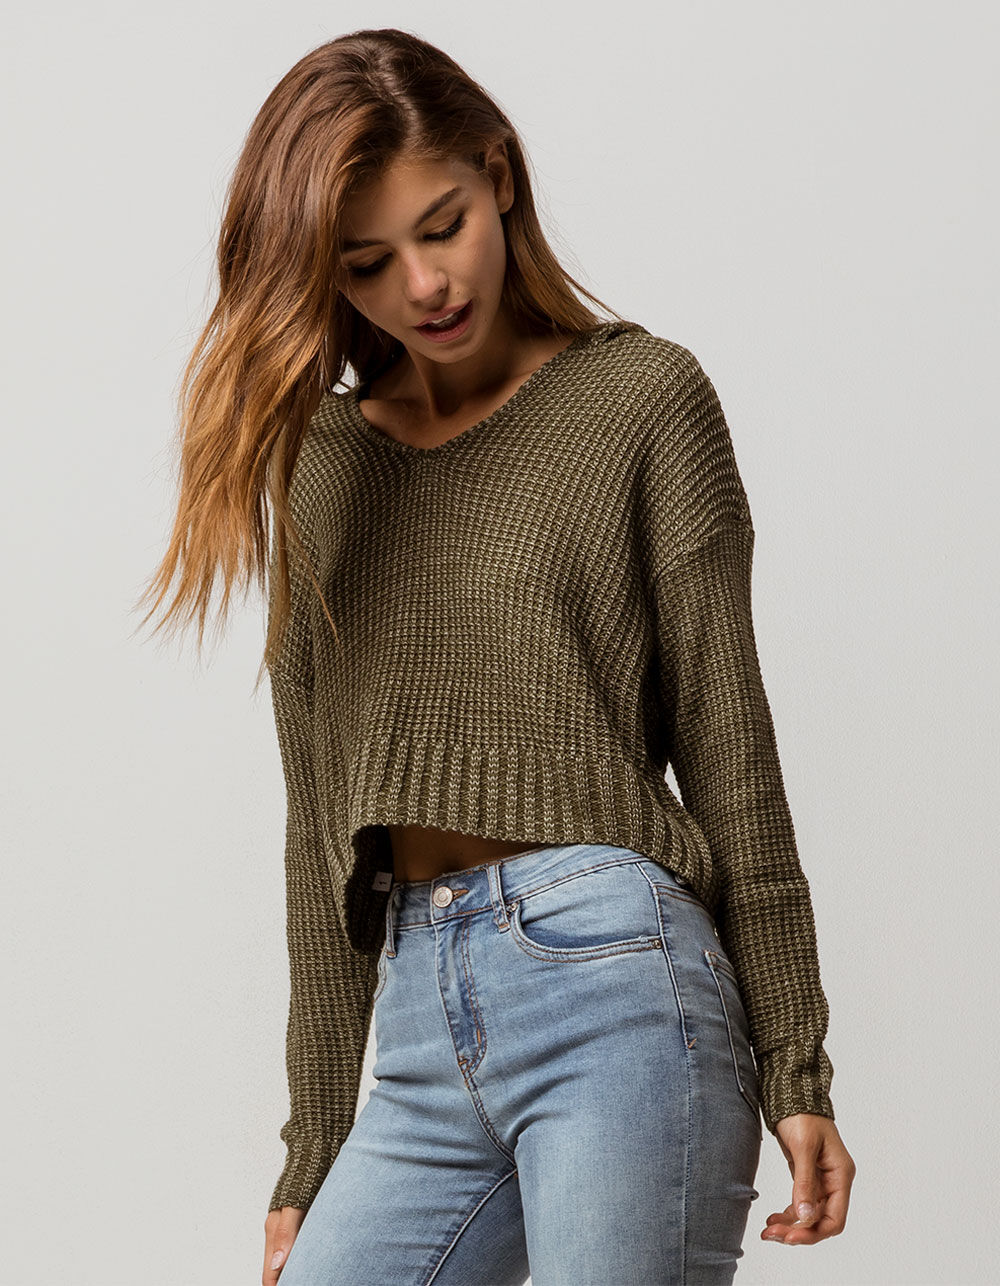 SKY AND SPARROW Crop Olive Womens Hooded Sweater - OLIVE | Tillys